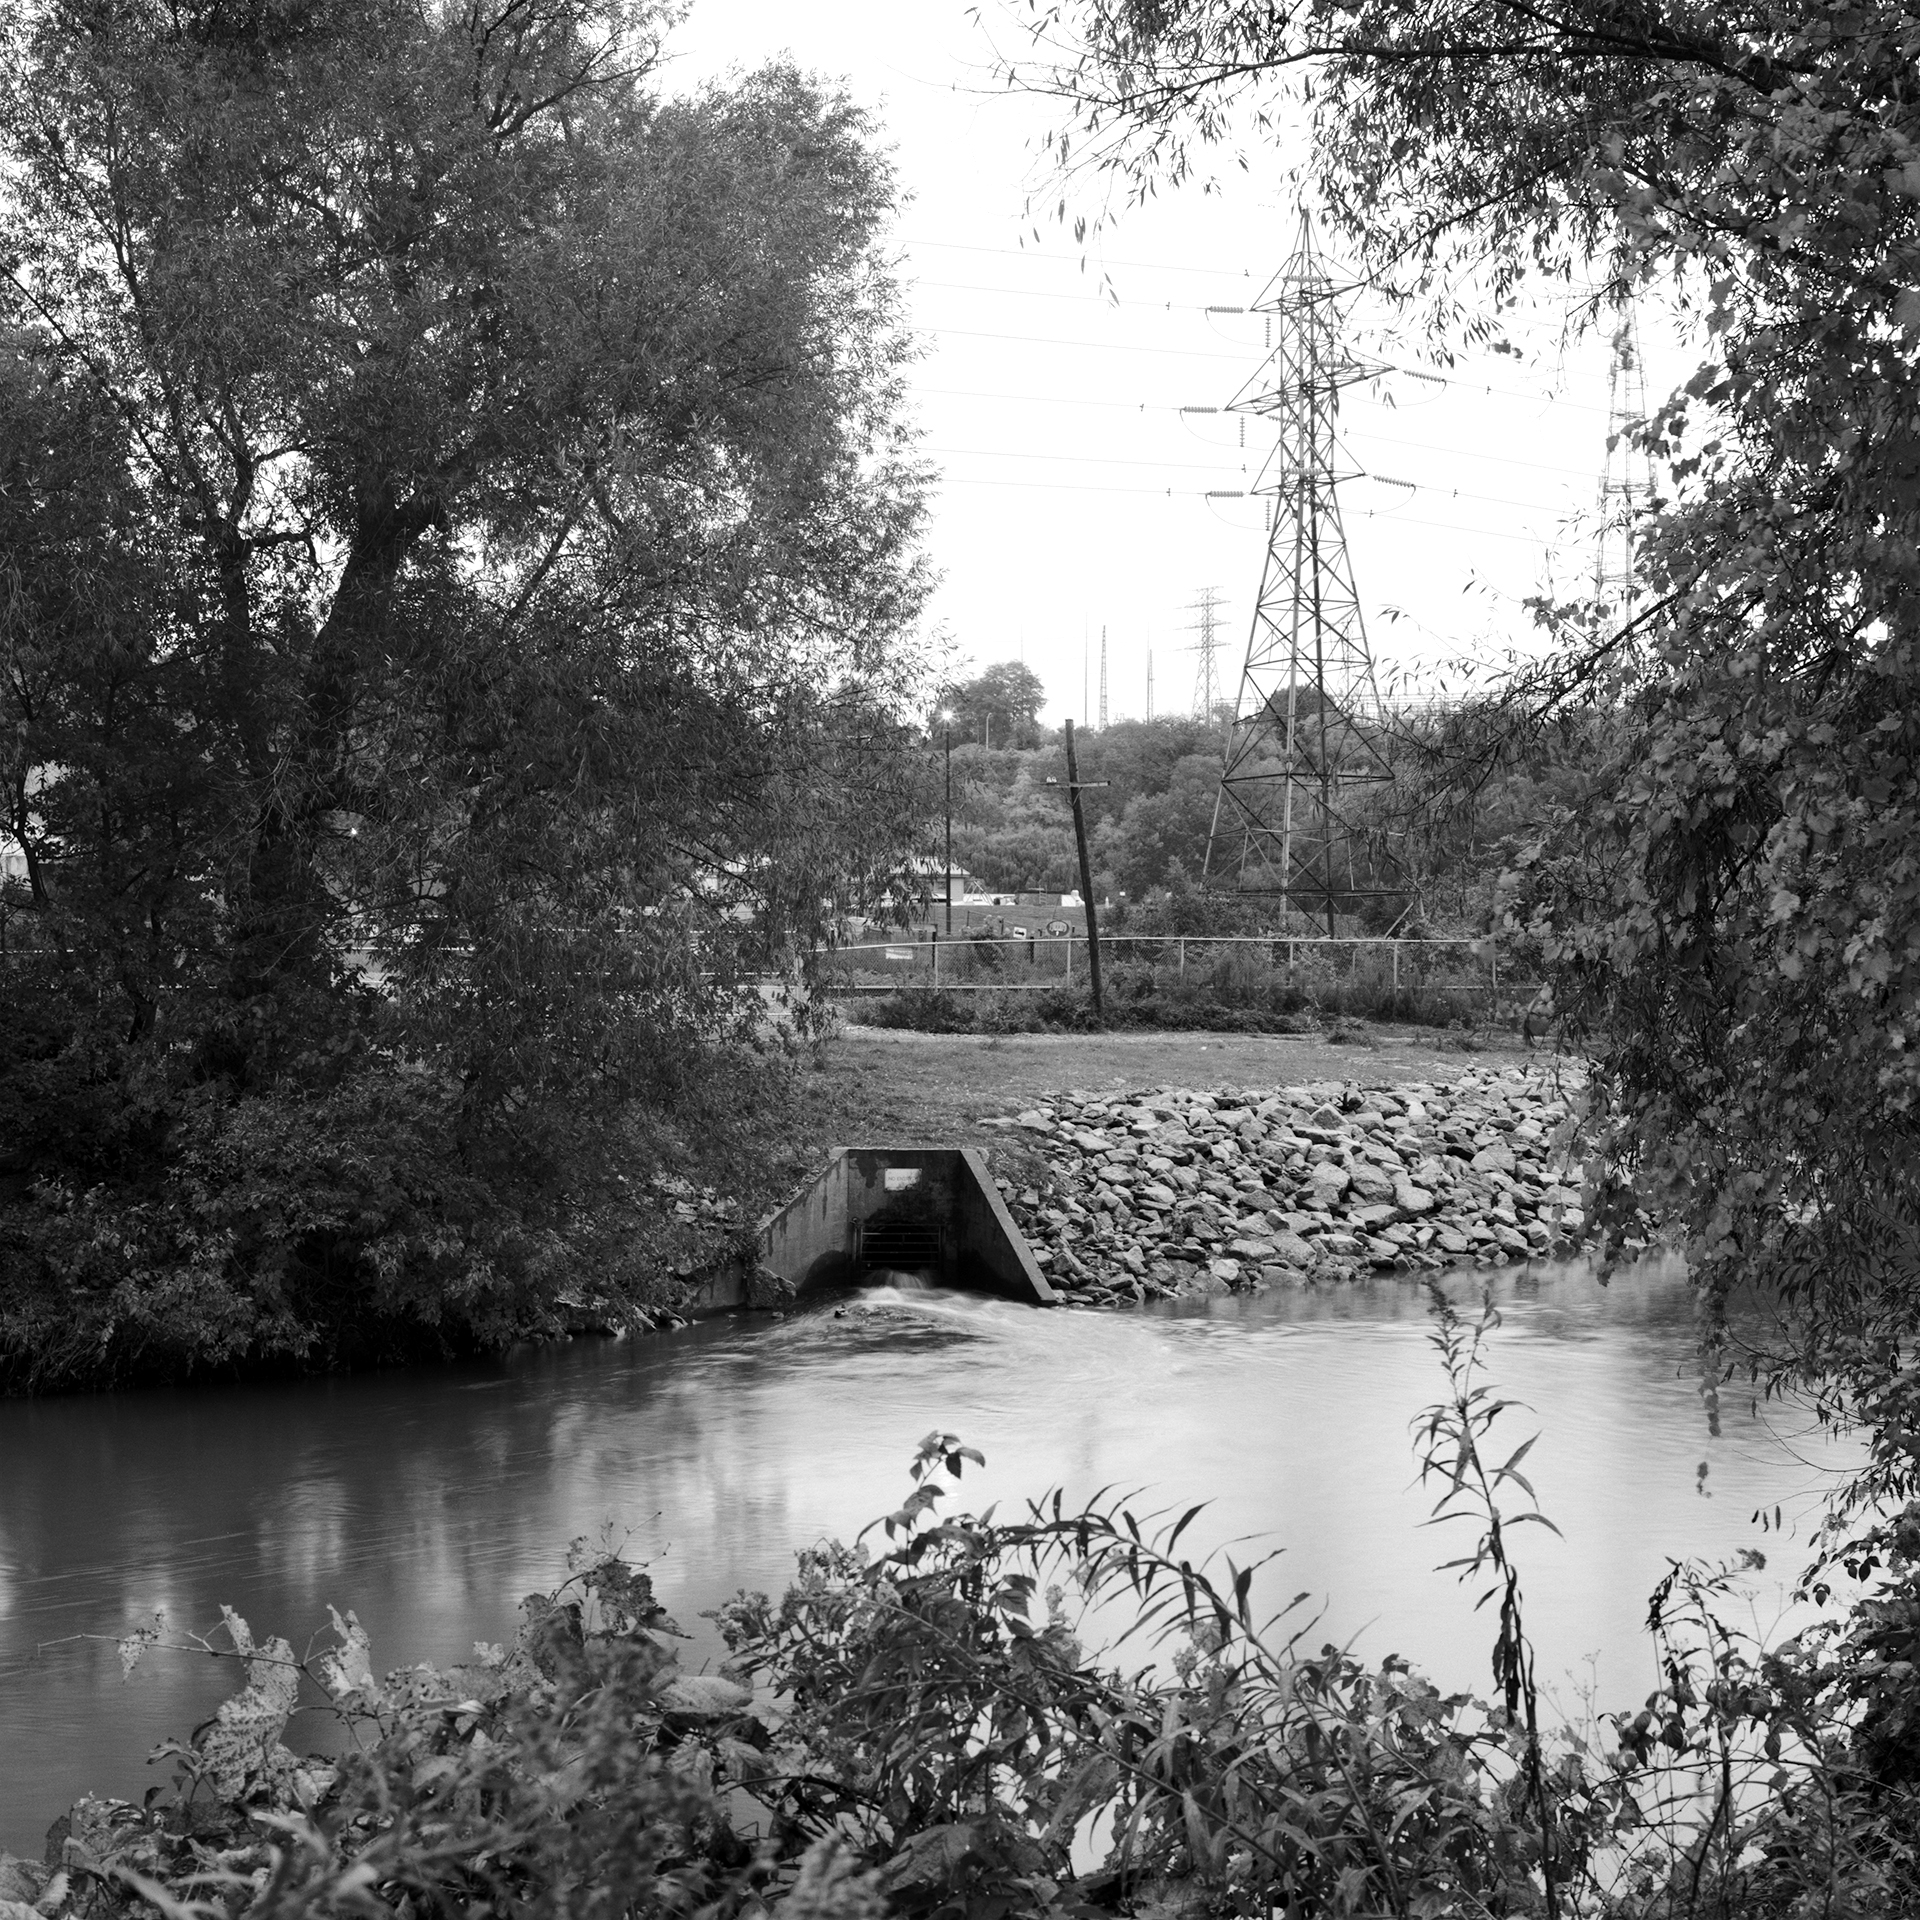 Where The River Runs # 8: A square black and white photograph from the edge of a river. Foliage lines the bottom of the frame as water flows behind it. Tall trees line the sides of the image as buildings, and power lines can be seen behind the constructed embankment and sewer in the middle of the image.